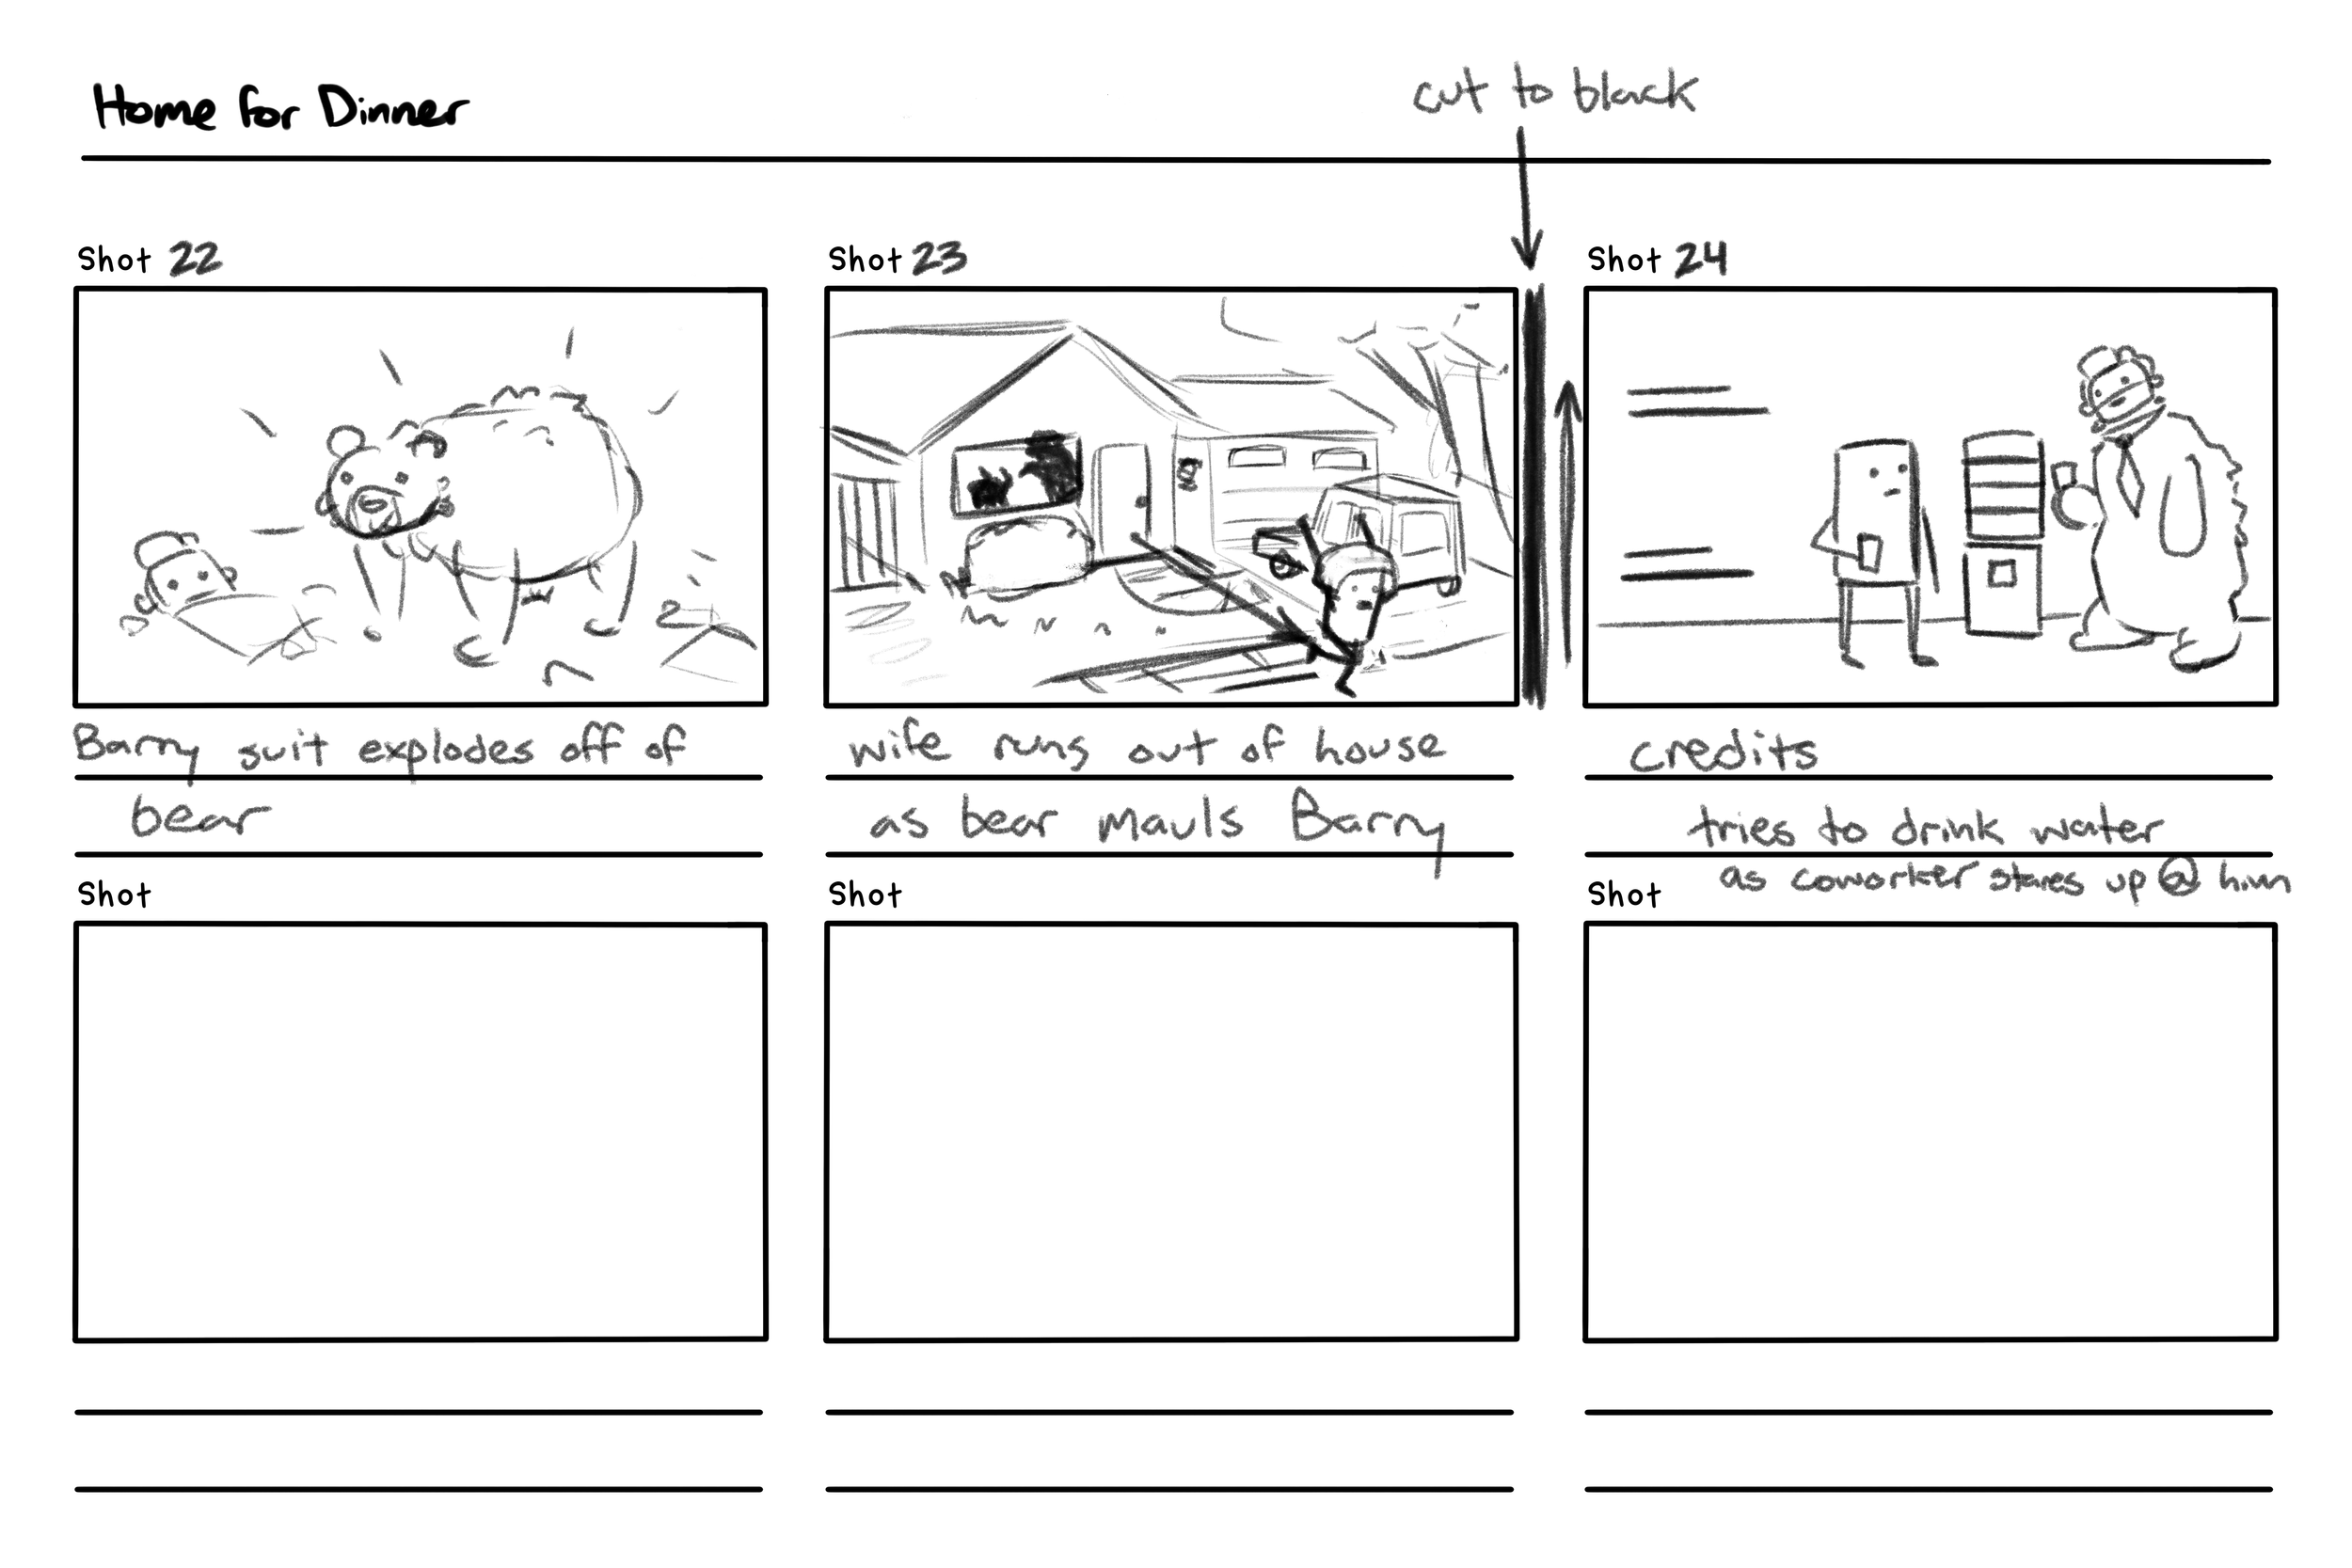 Home_For_Dinner_Storyboard-5.png